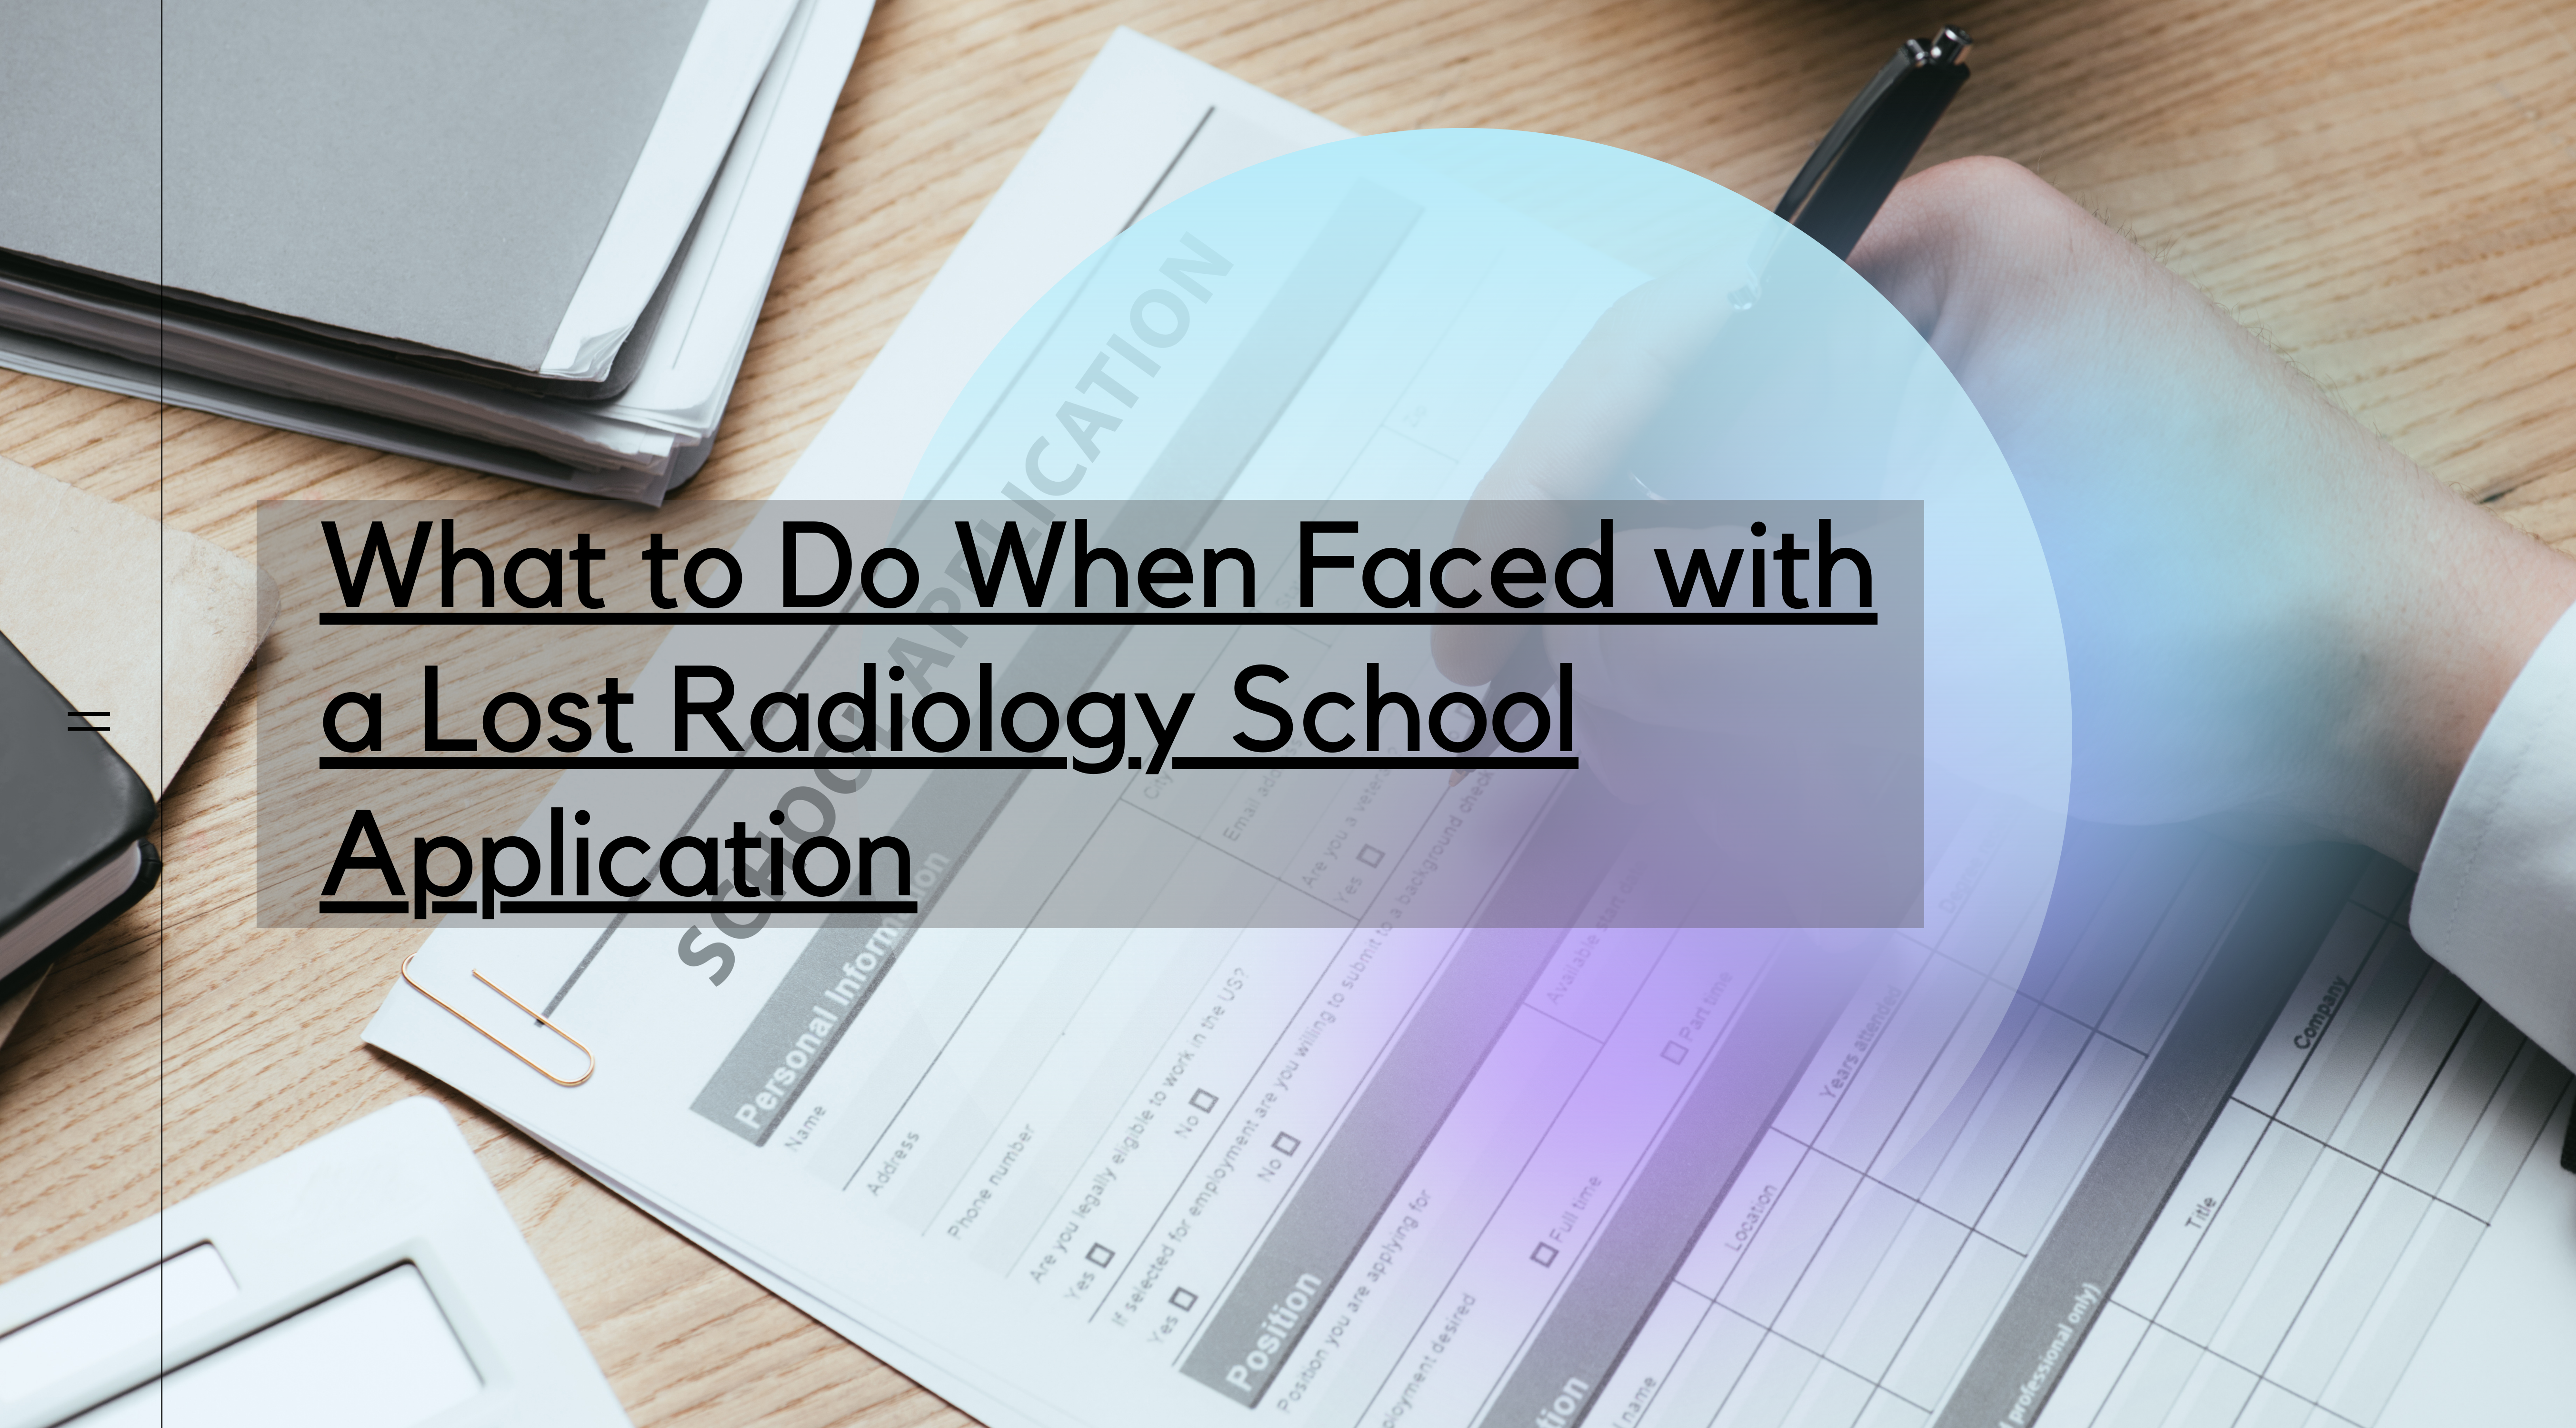 What to Do When Faced with a Lost Radiology School Application